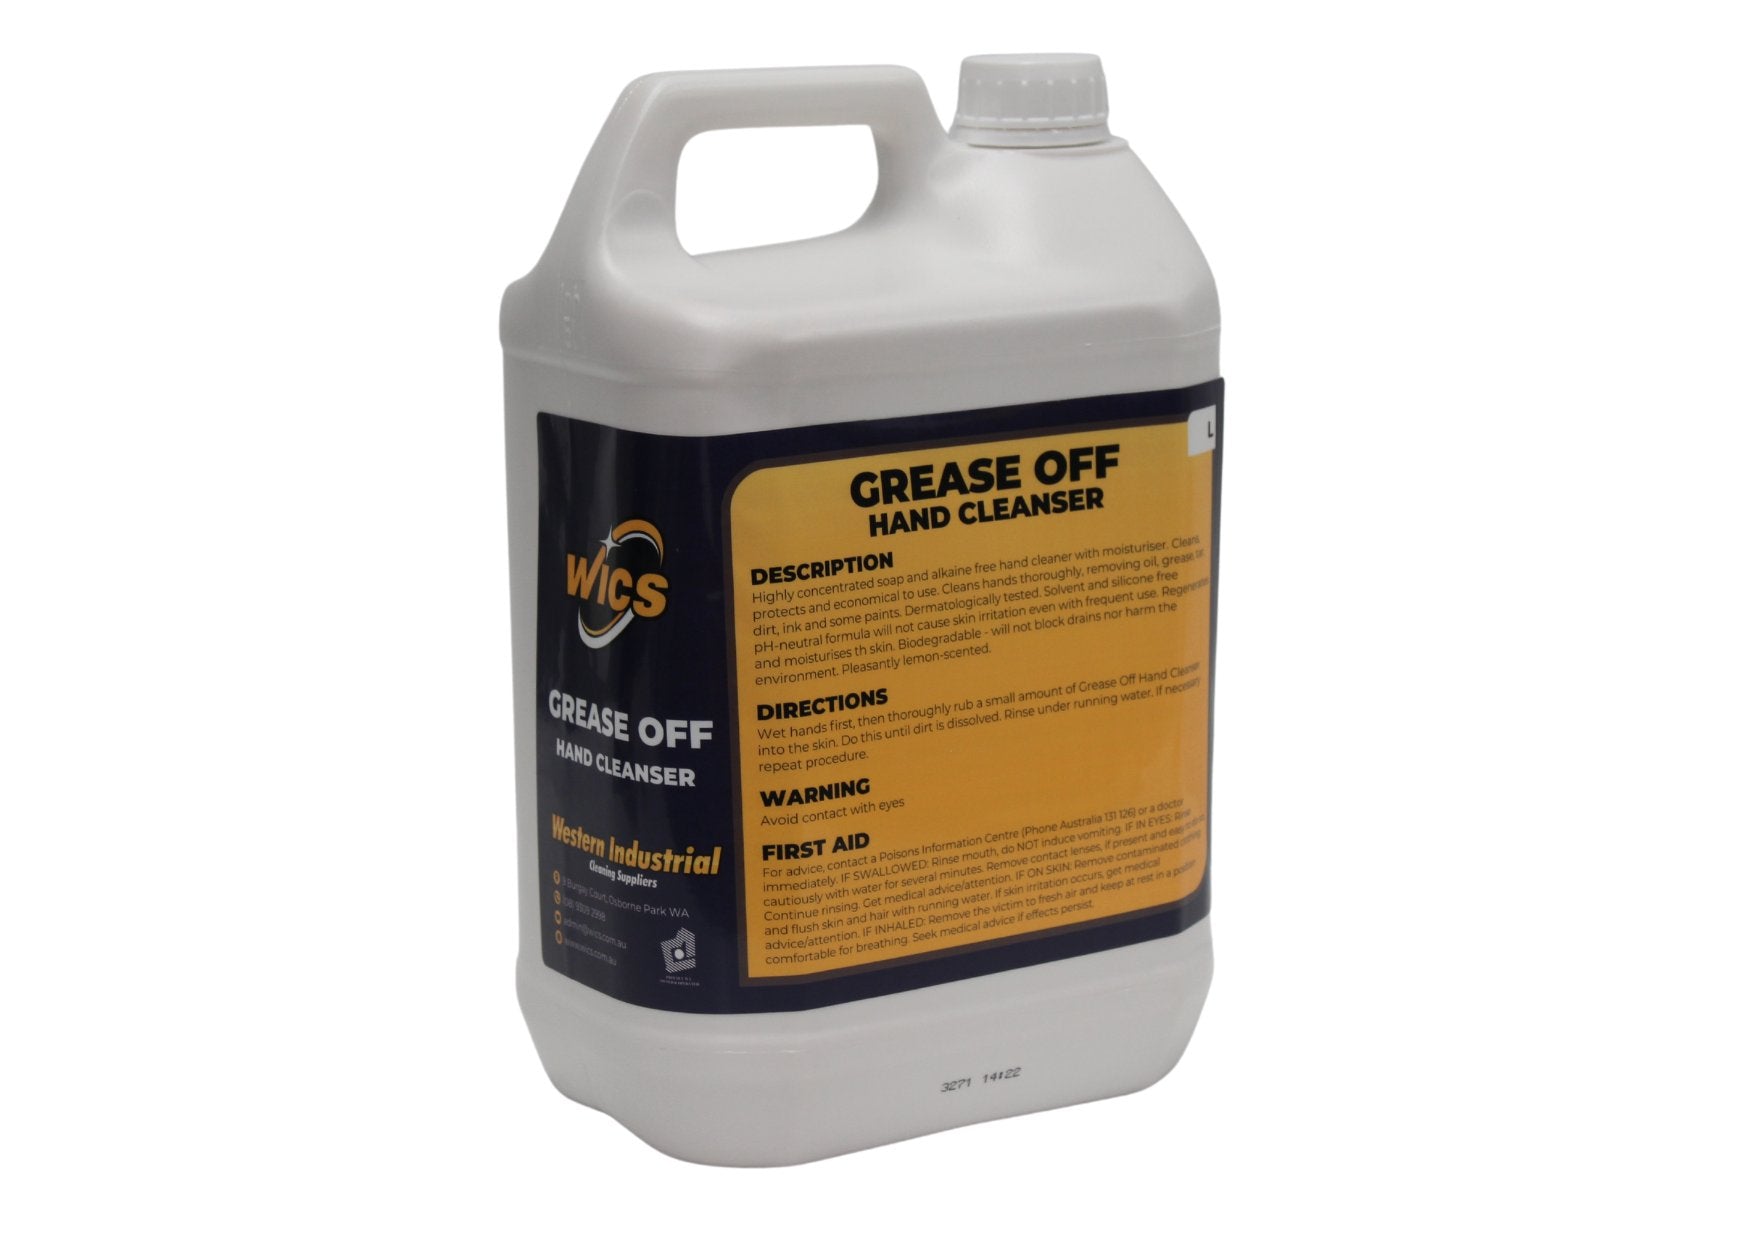 Grease Off - Hand Cleaner Industrial Streangth